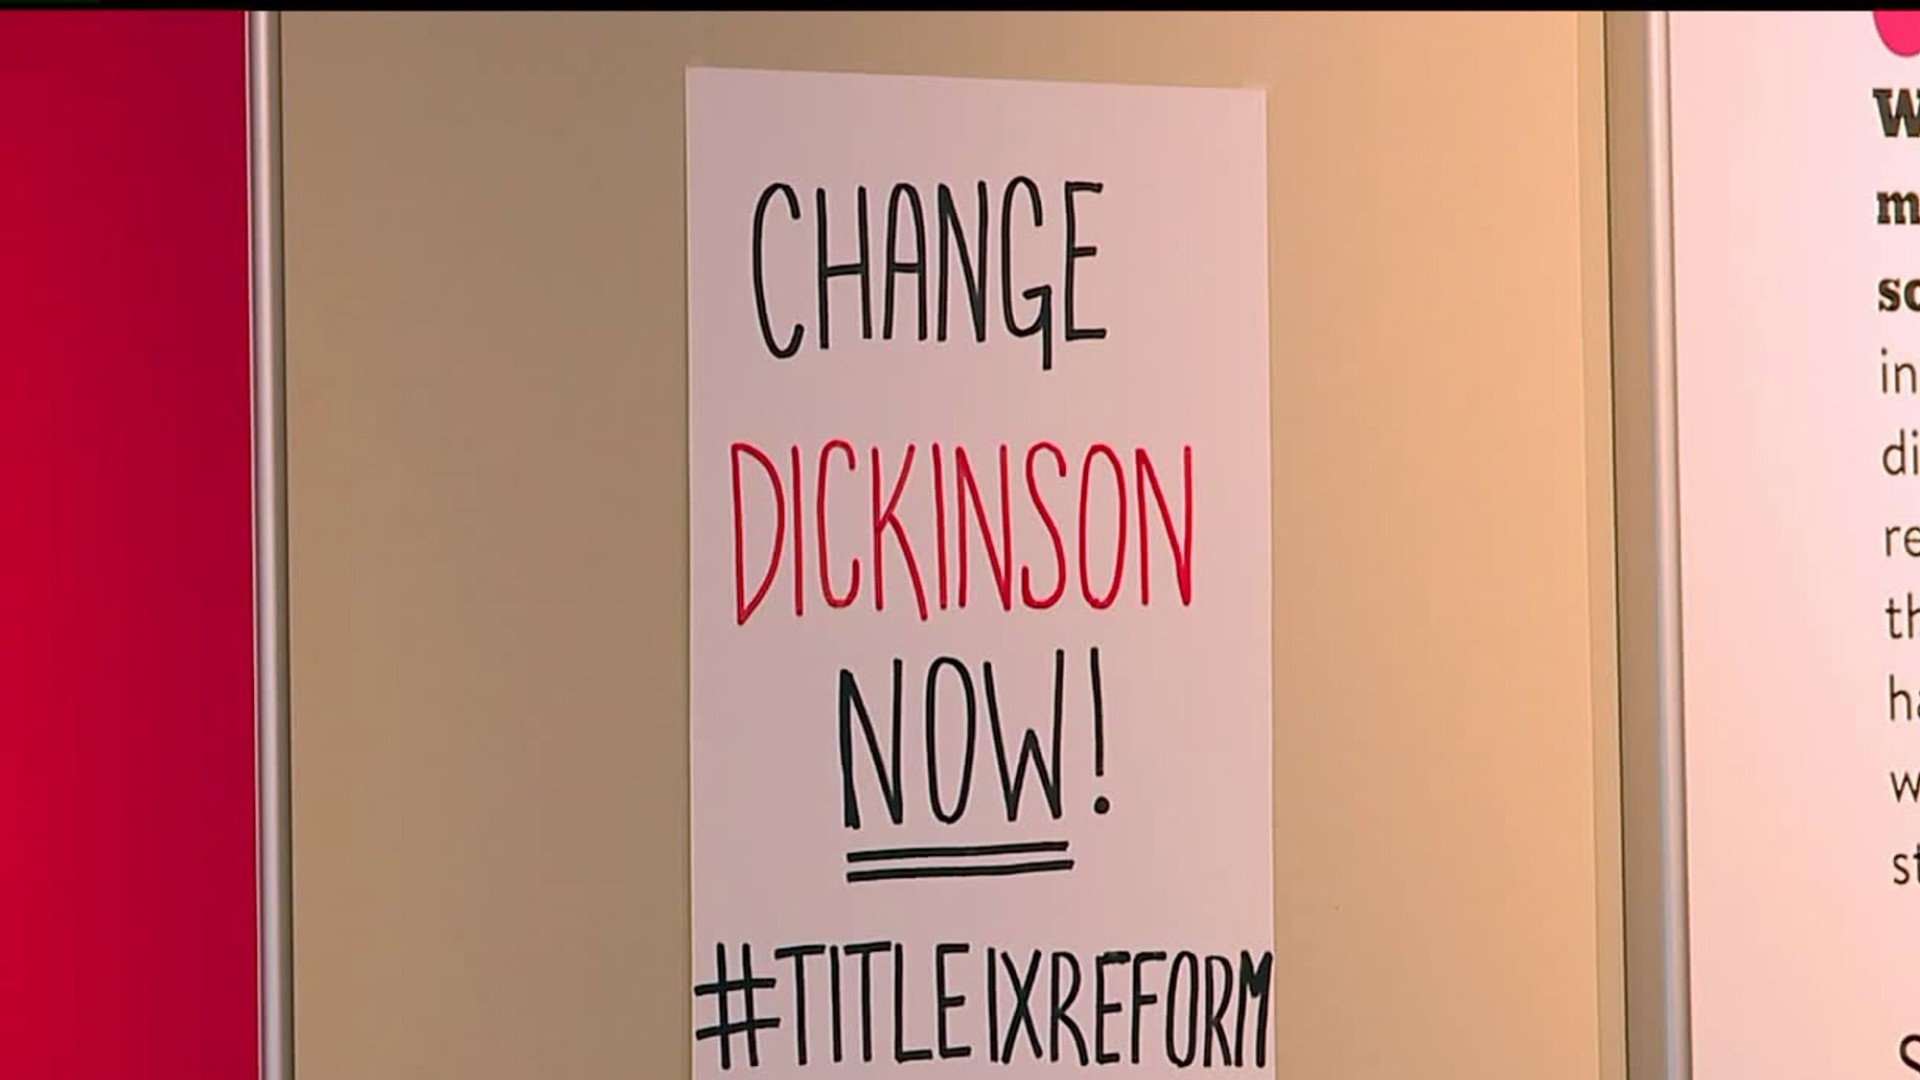 Day 2 of sit-in protest at Dickinson College